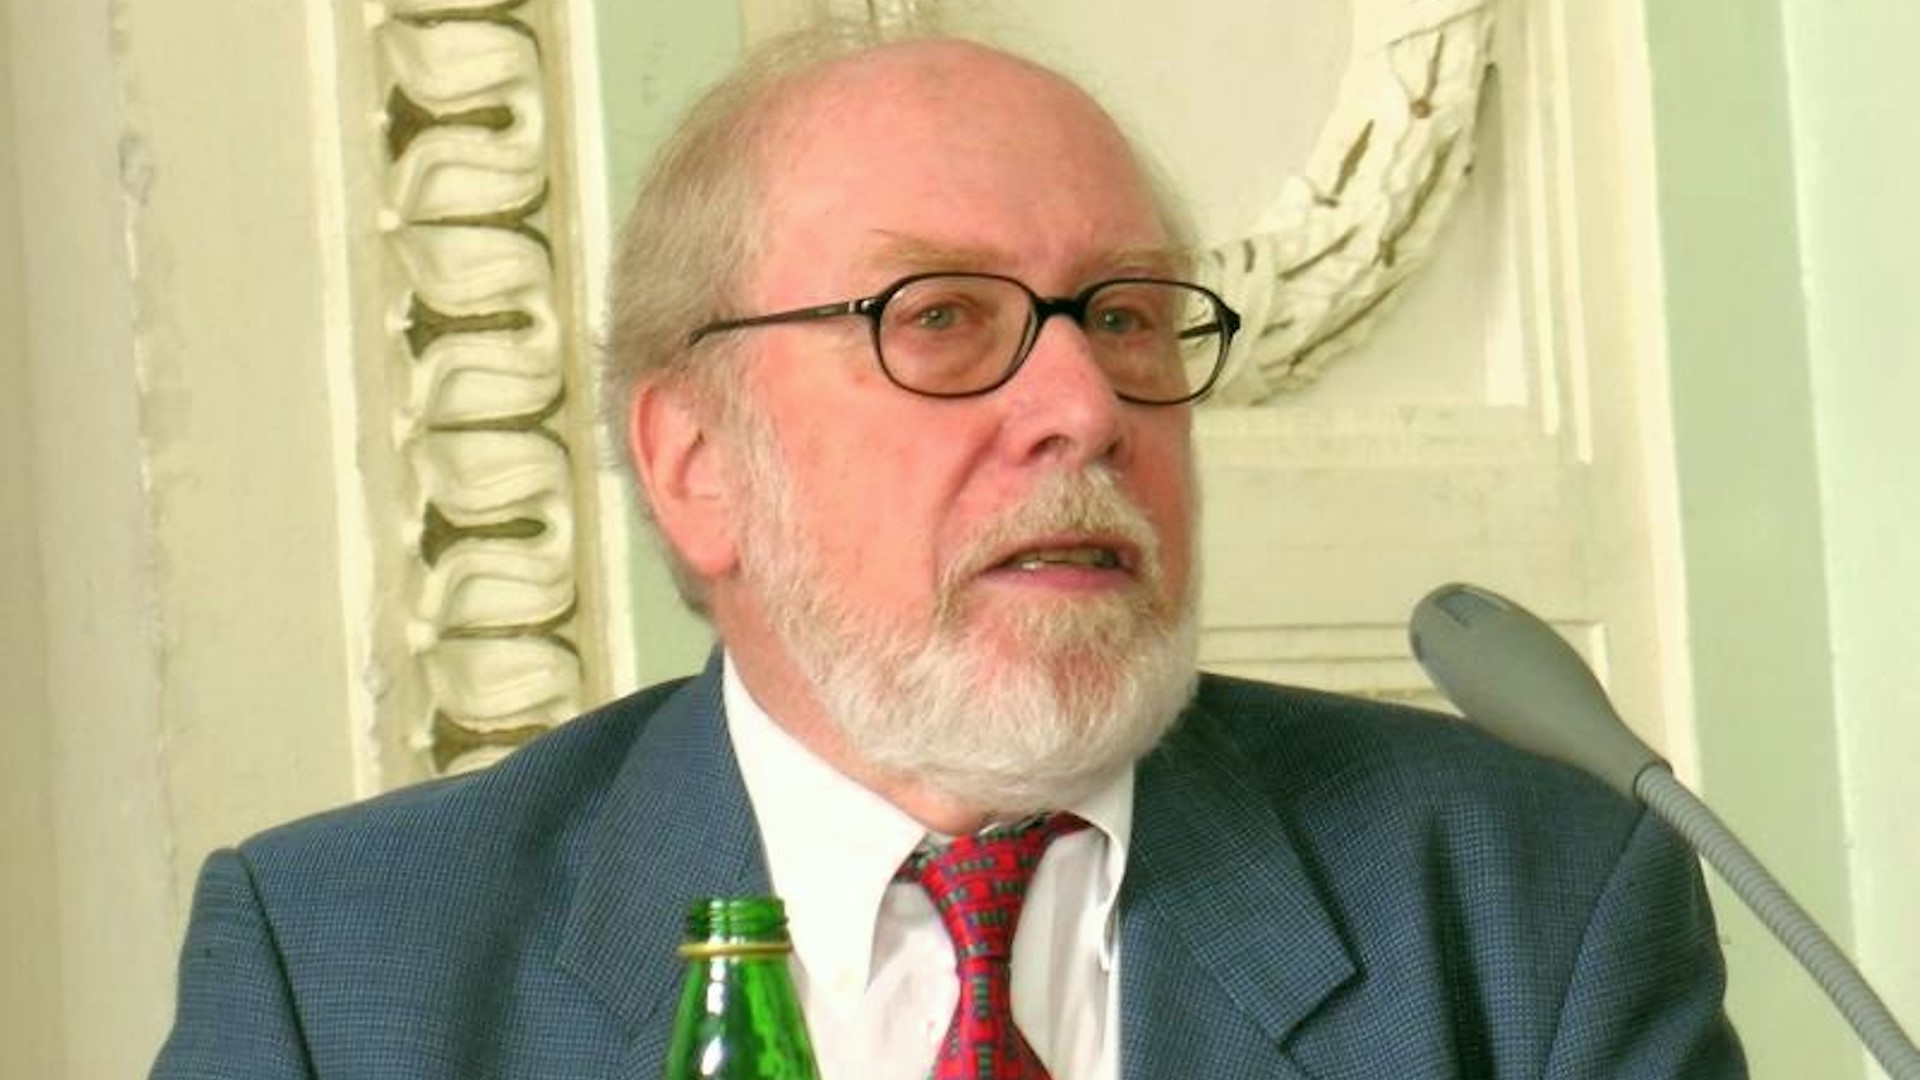 Pascal creator Niklaus Wirth has died